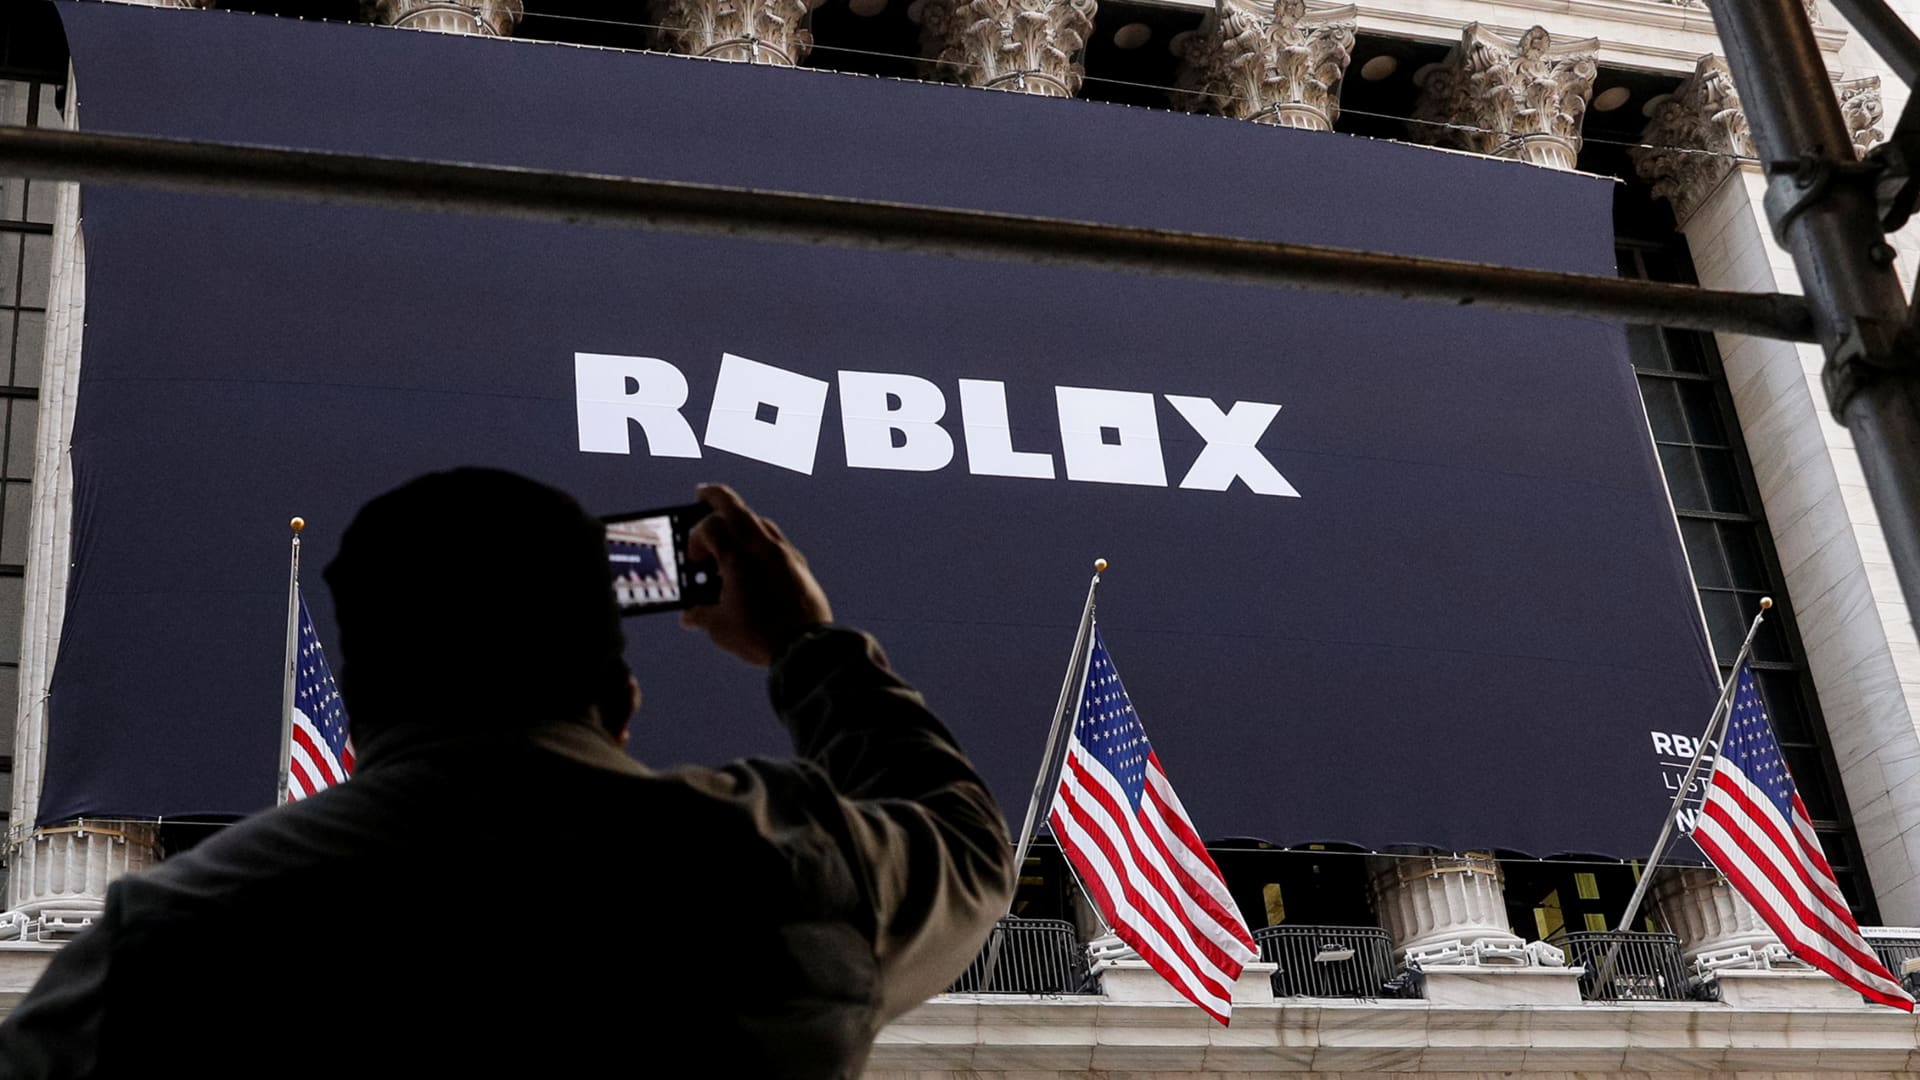 Roblox closes down more than 15% after November update shows slowing growth